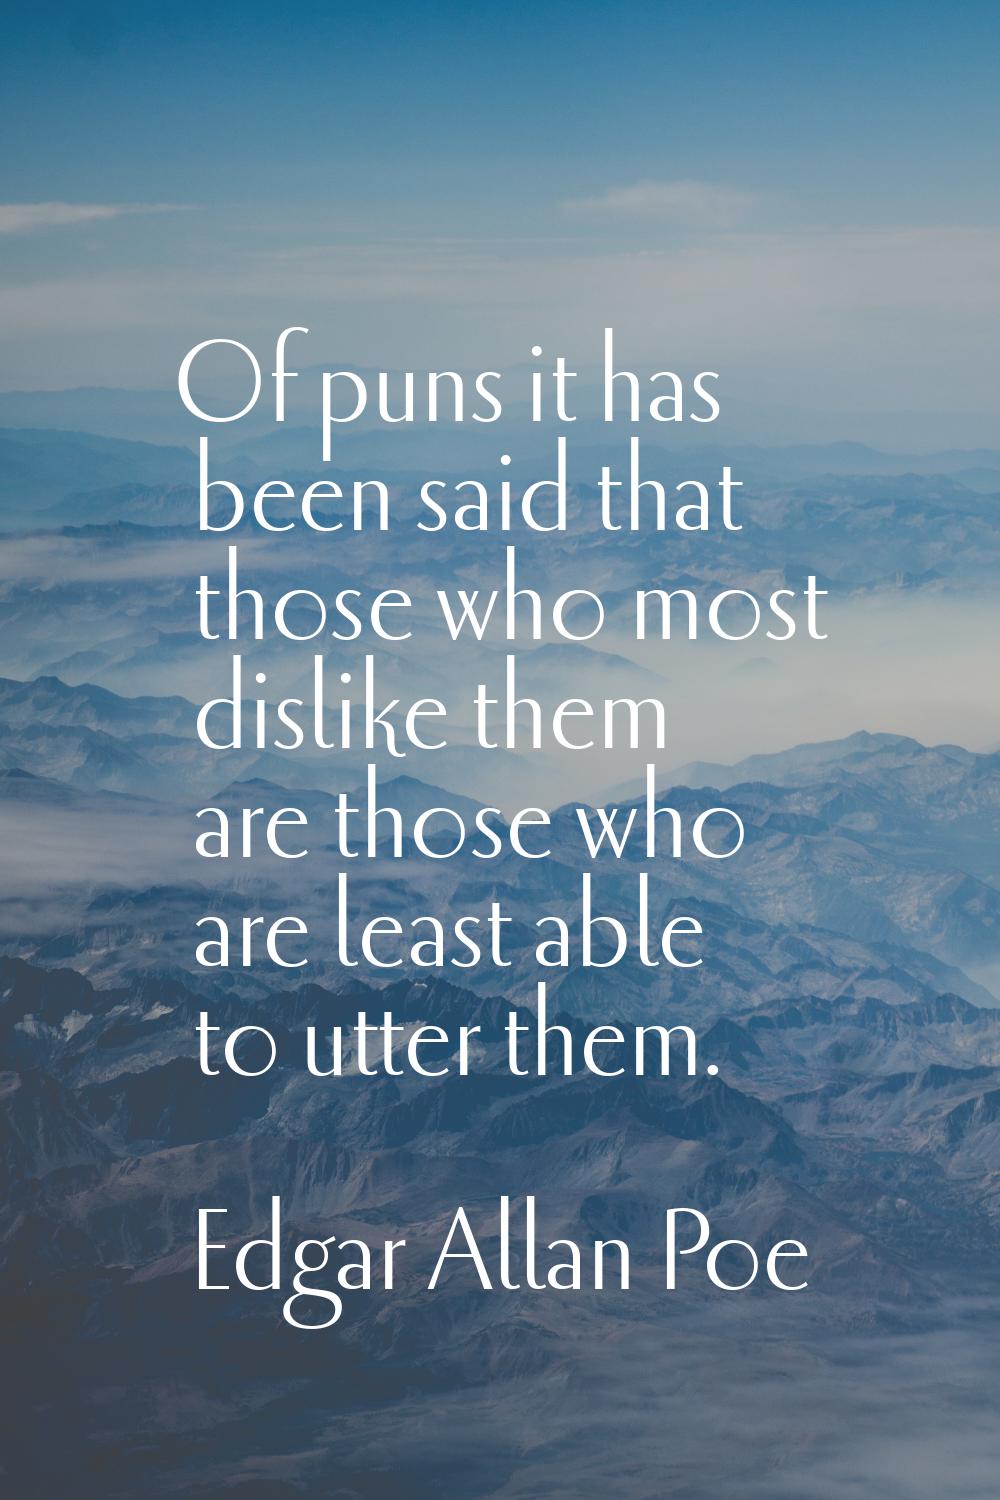 Of puns it has been said that those who most dislike them are those who are least able to utter the